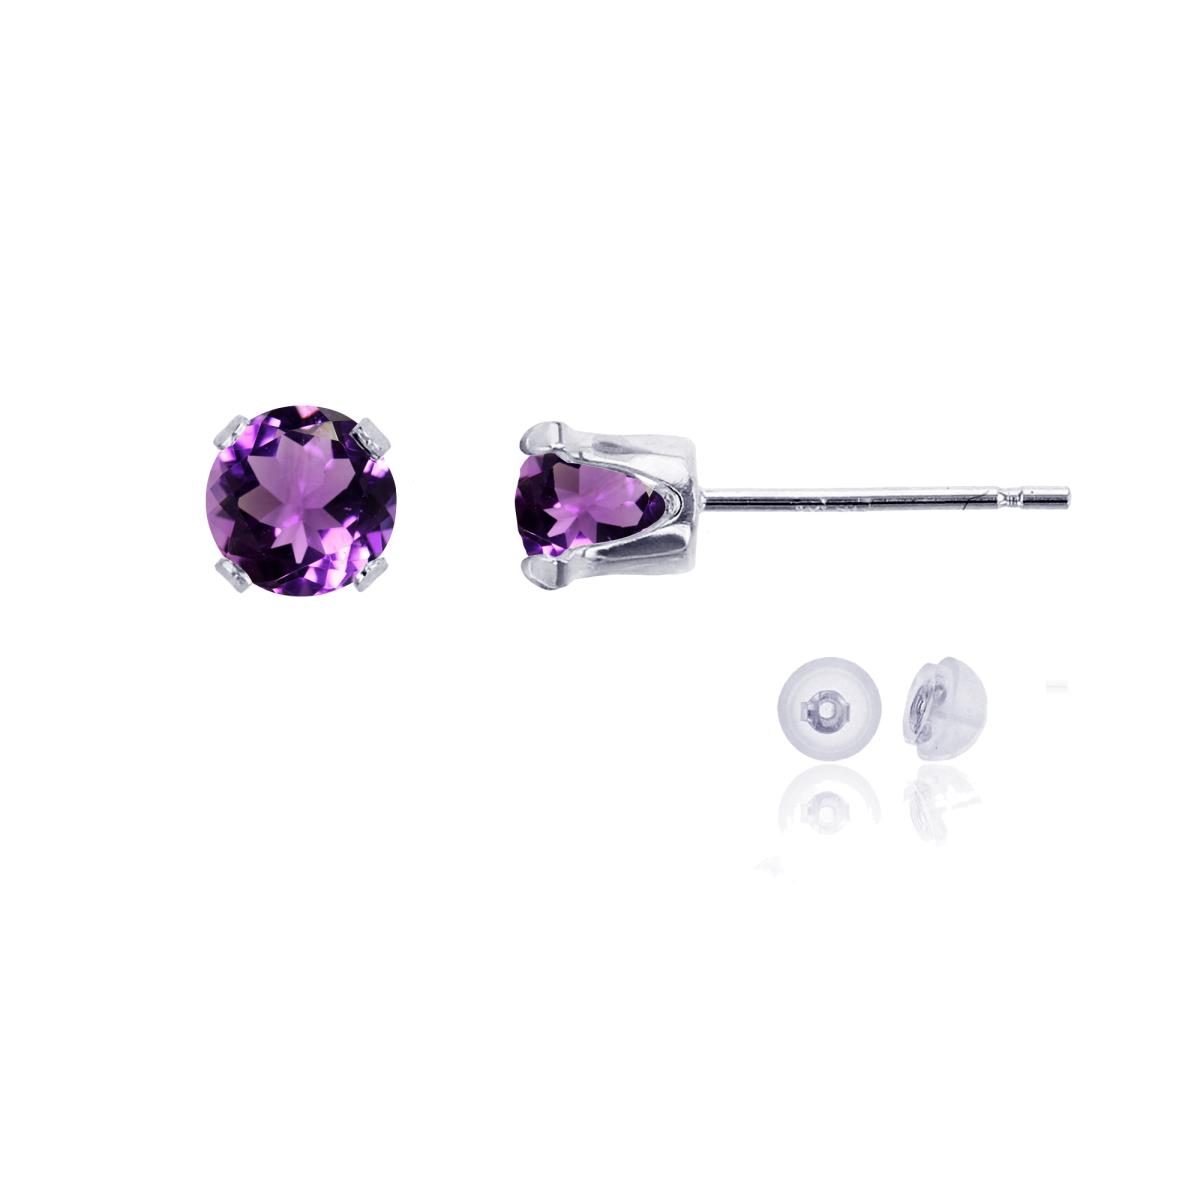 10K White Gold 5mm Round Amethyst Stud Earring with Silicone Back